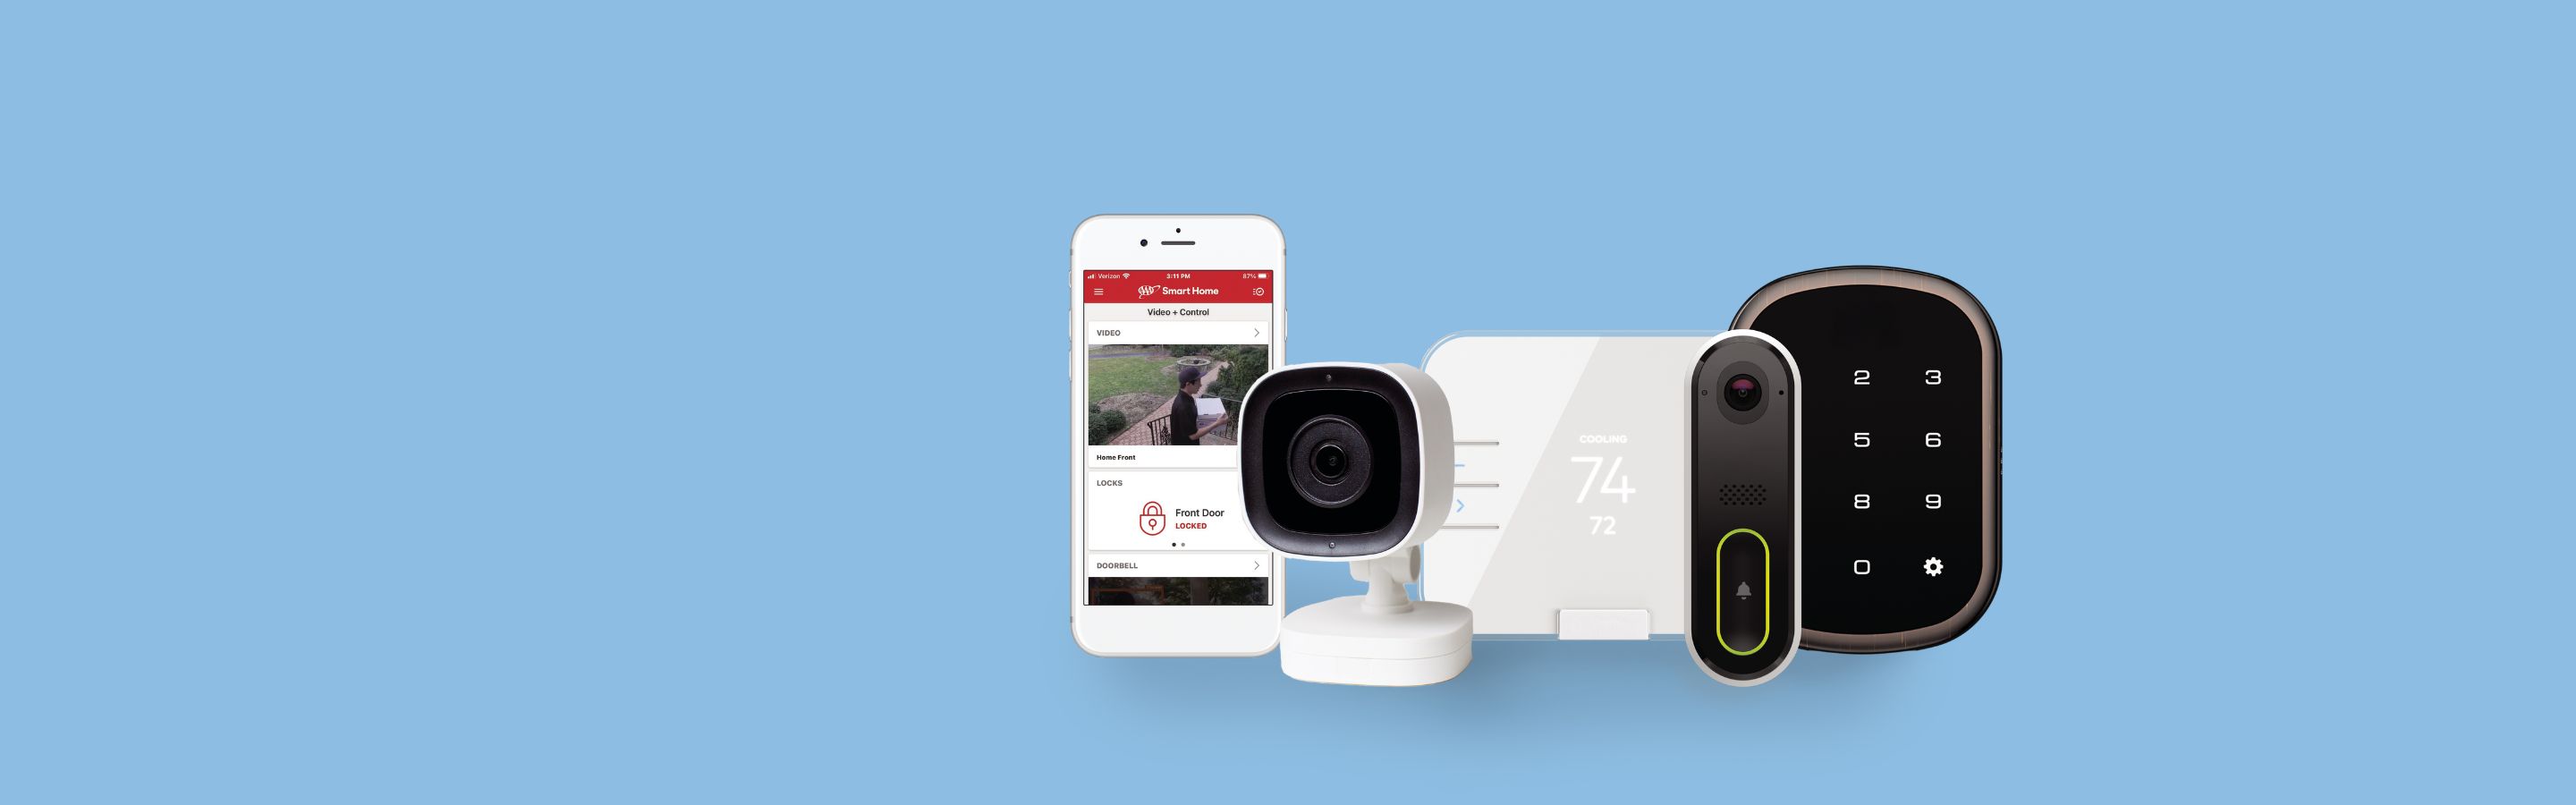 AAA Smart Home Security Systems & Alarm Monitoring